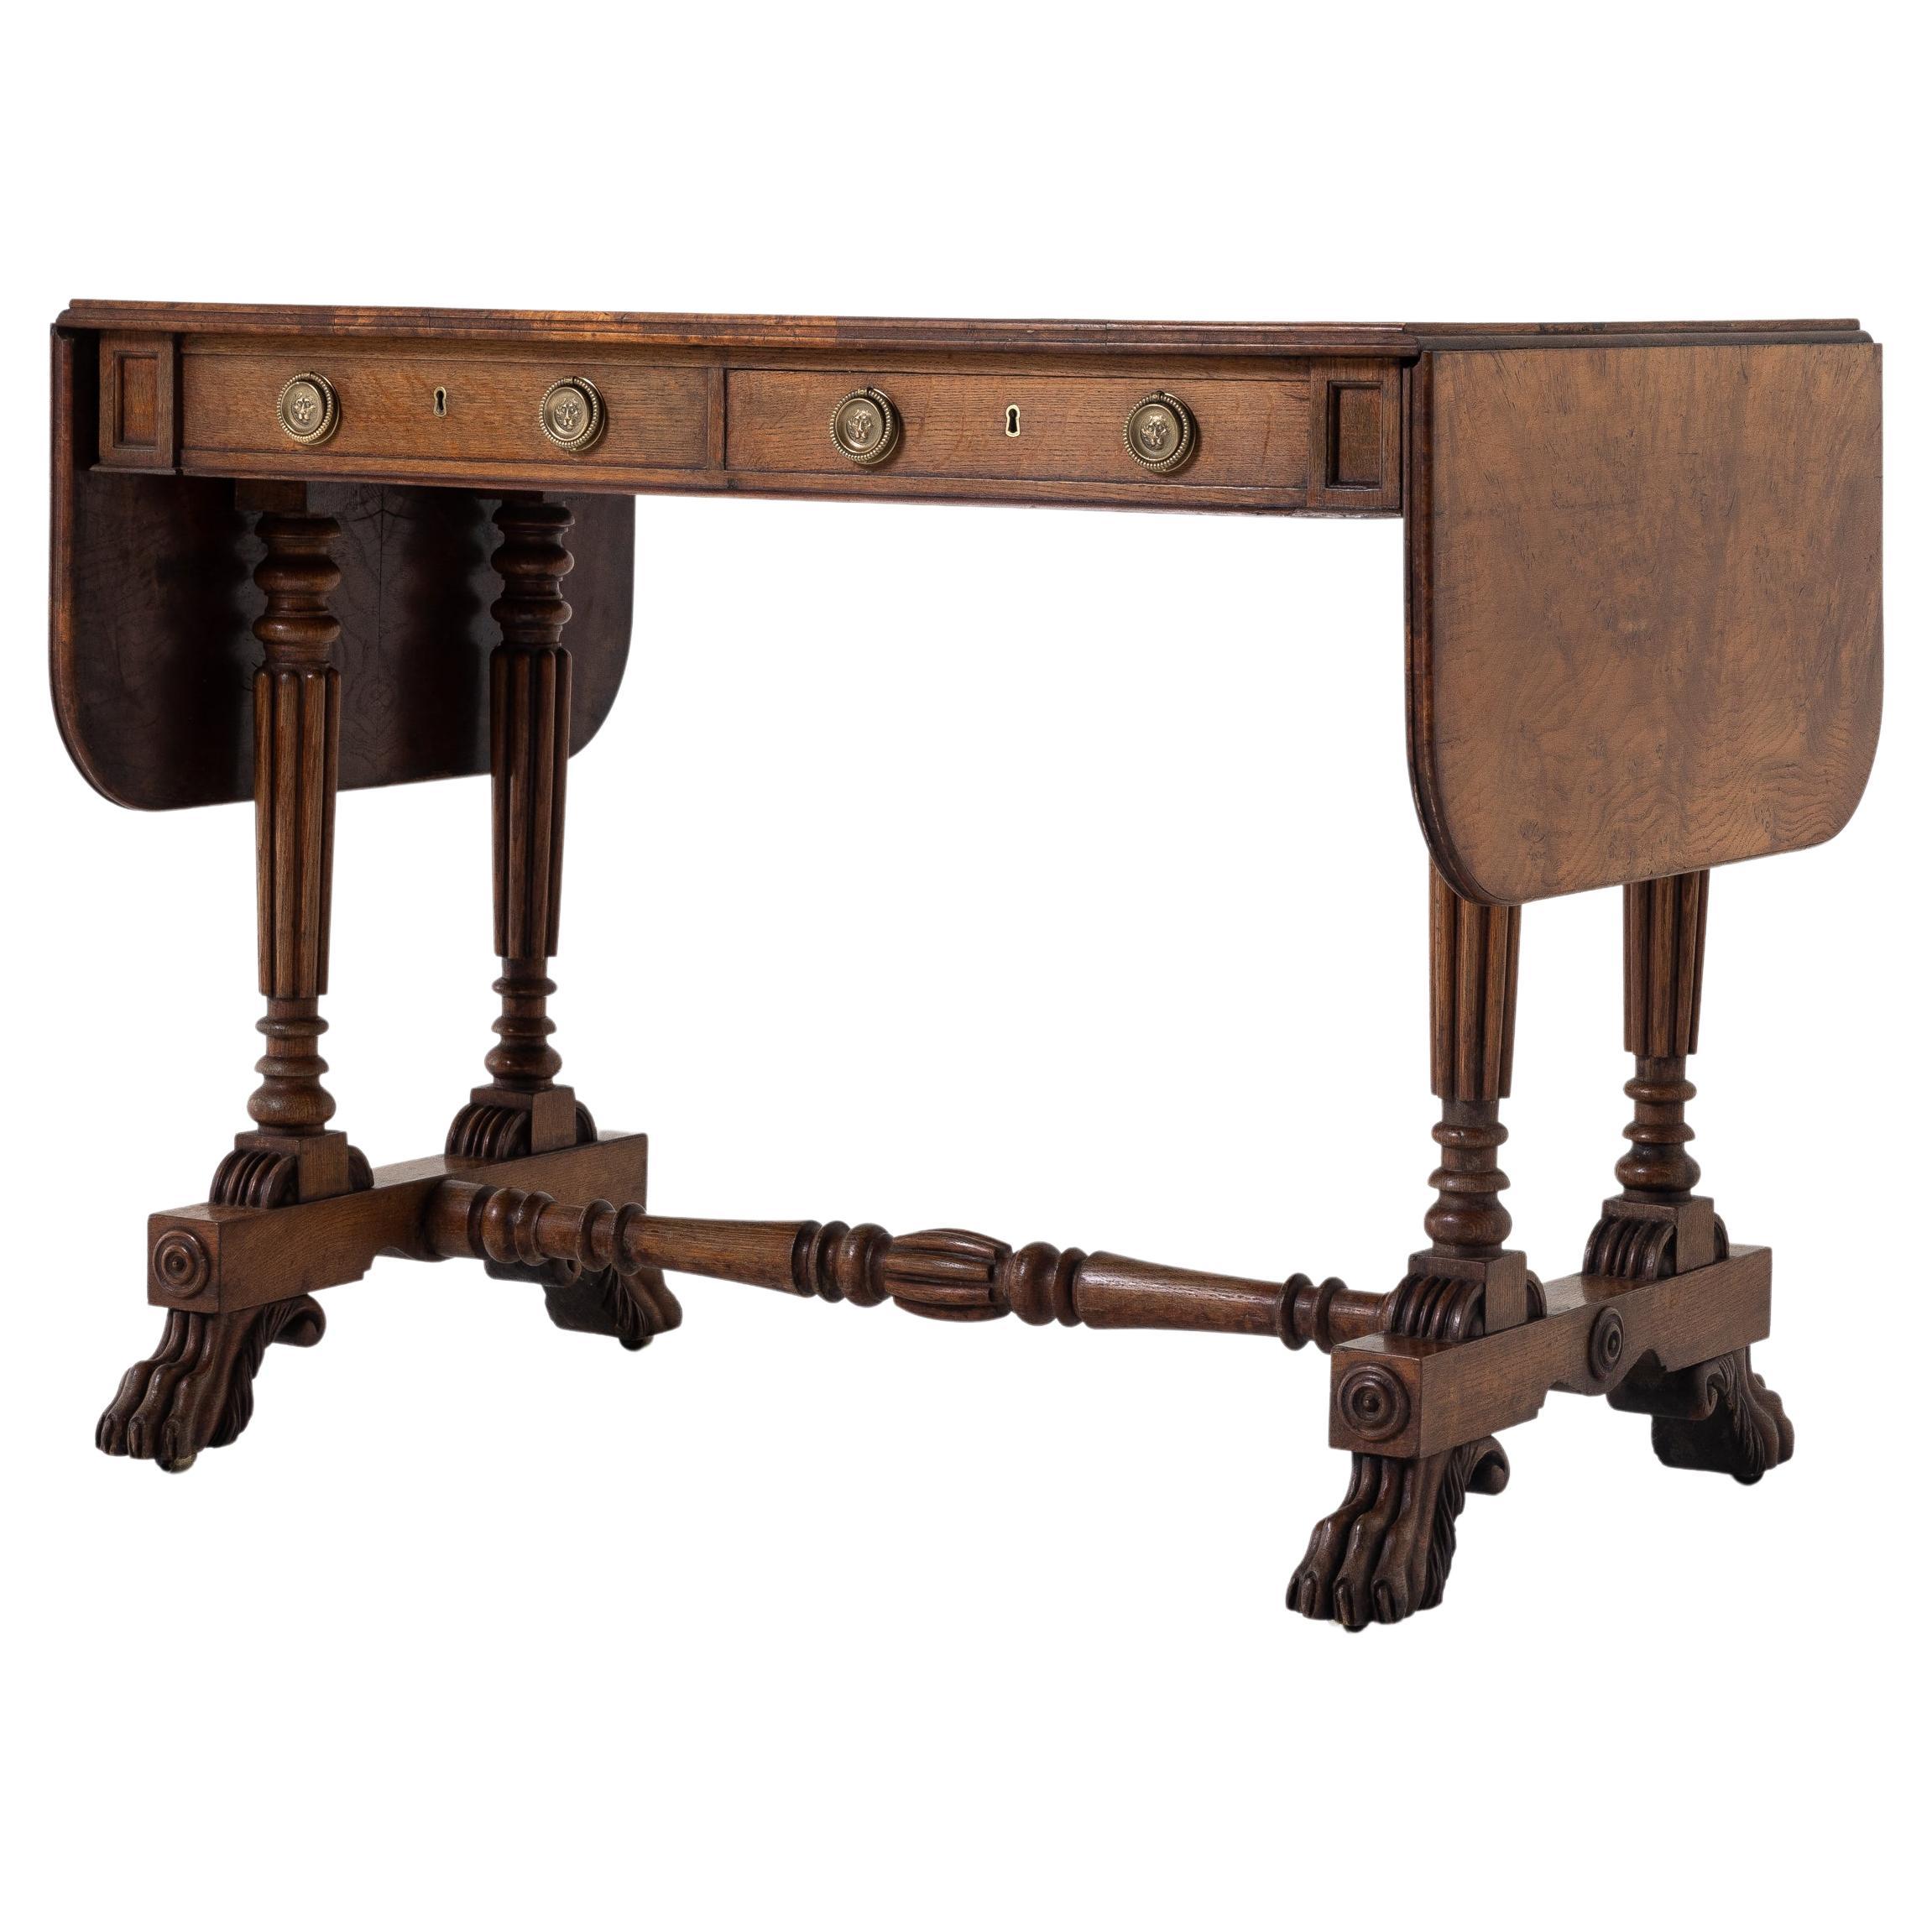 Important Regency Oak and Burr Elm Sofa Table, 'Attributed to George Bullock' For Sale